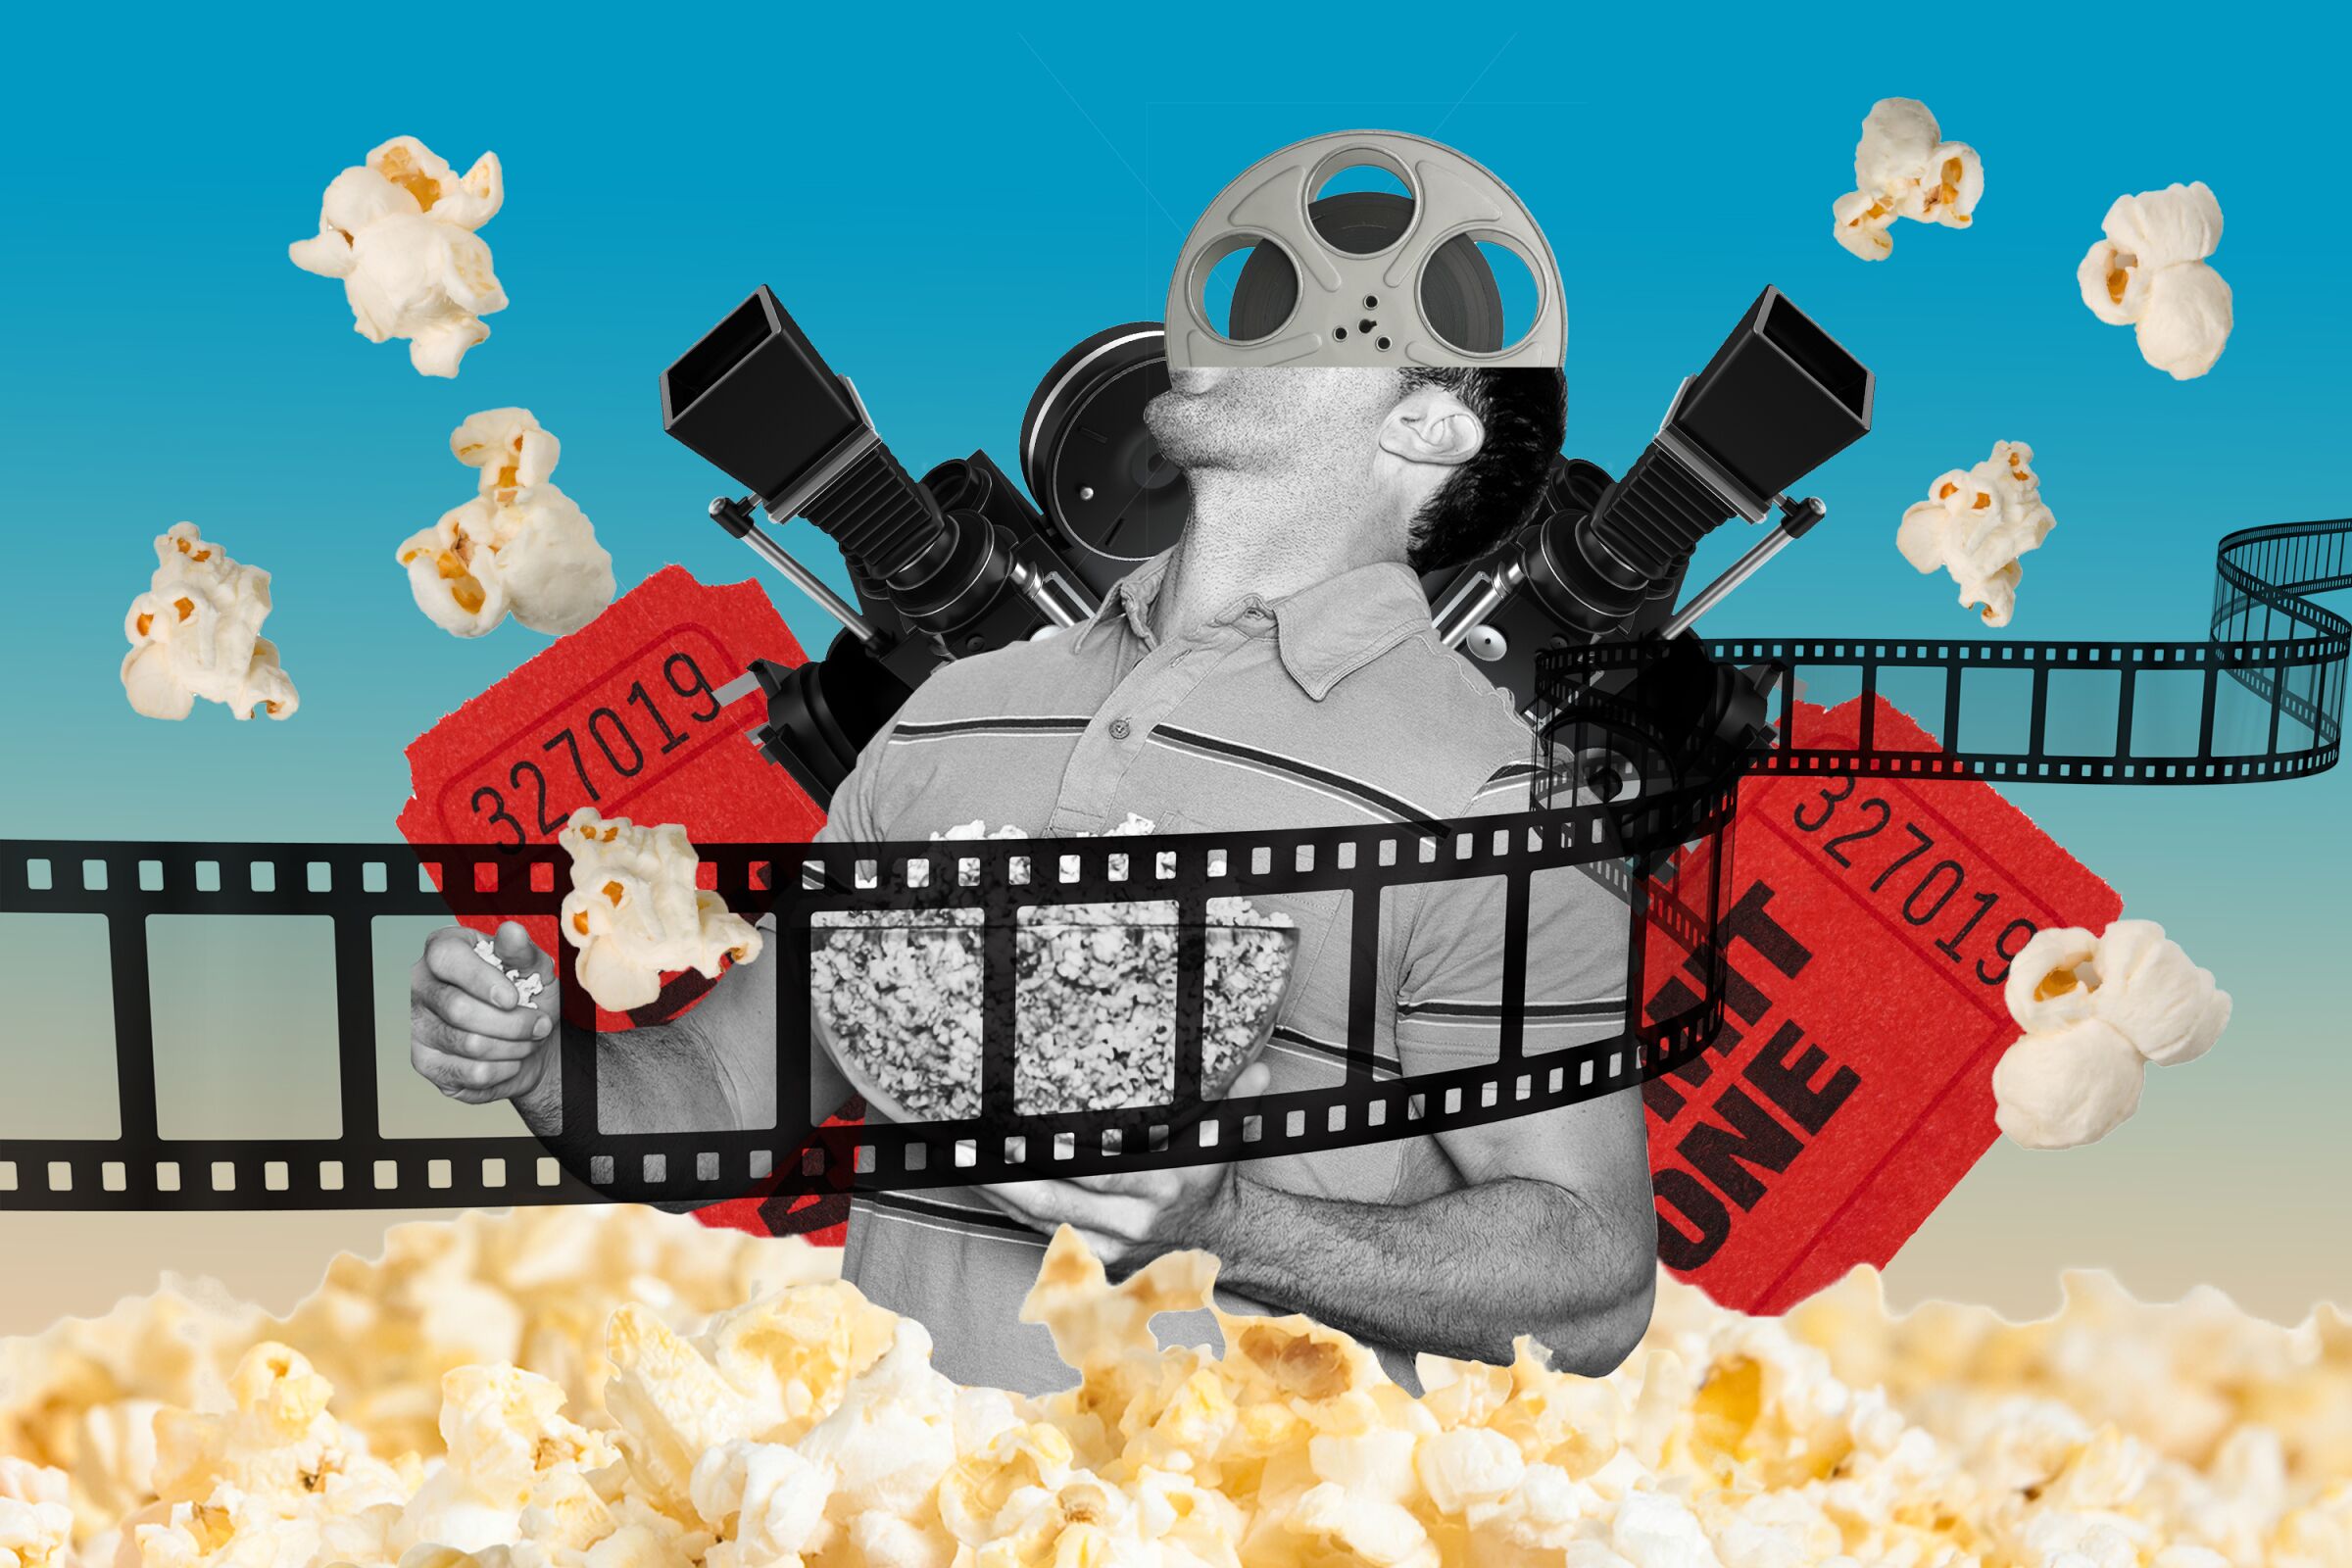 Surreal movie themed collage, a strip of film with a man with a reel of film for a head submerged in popcorn.